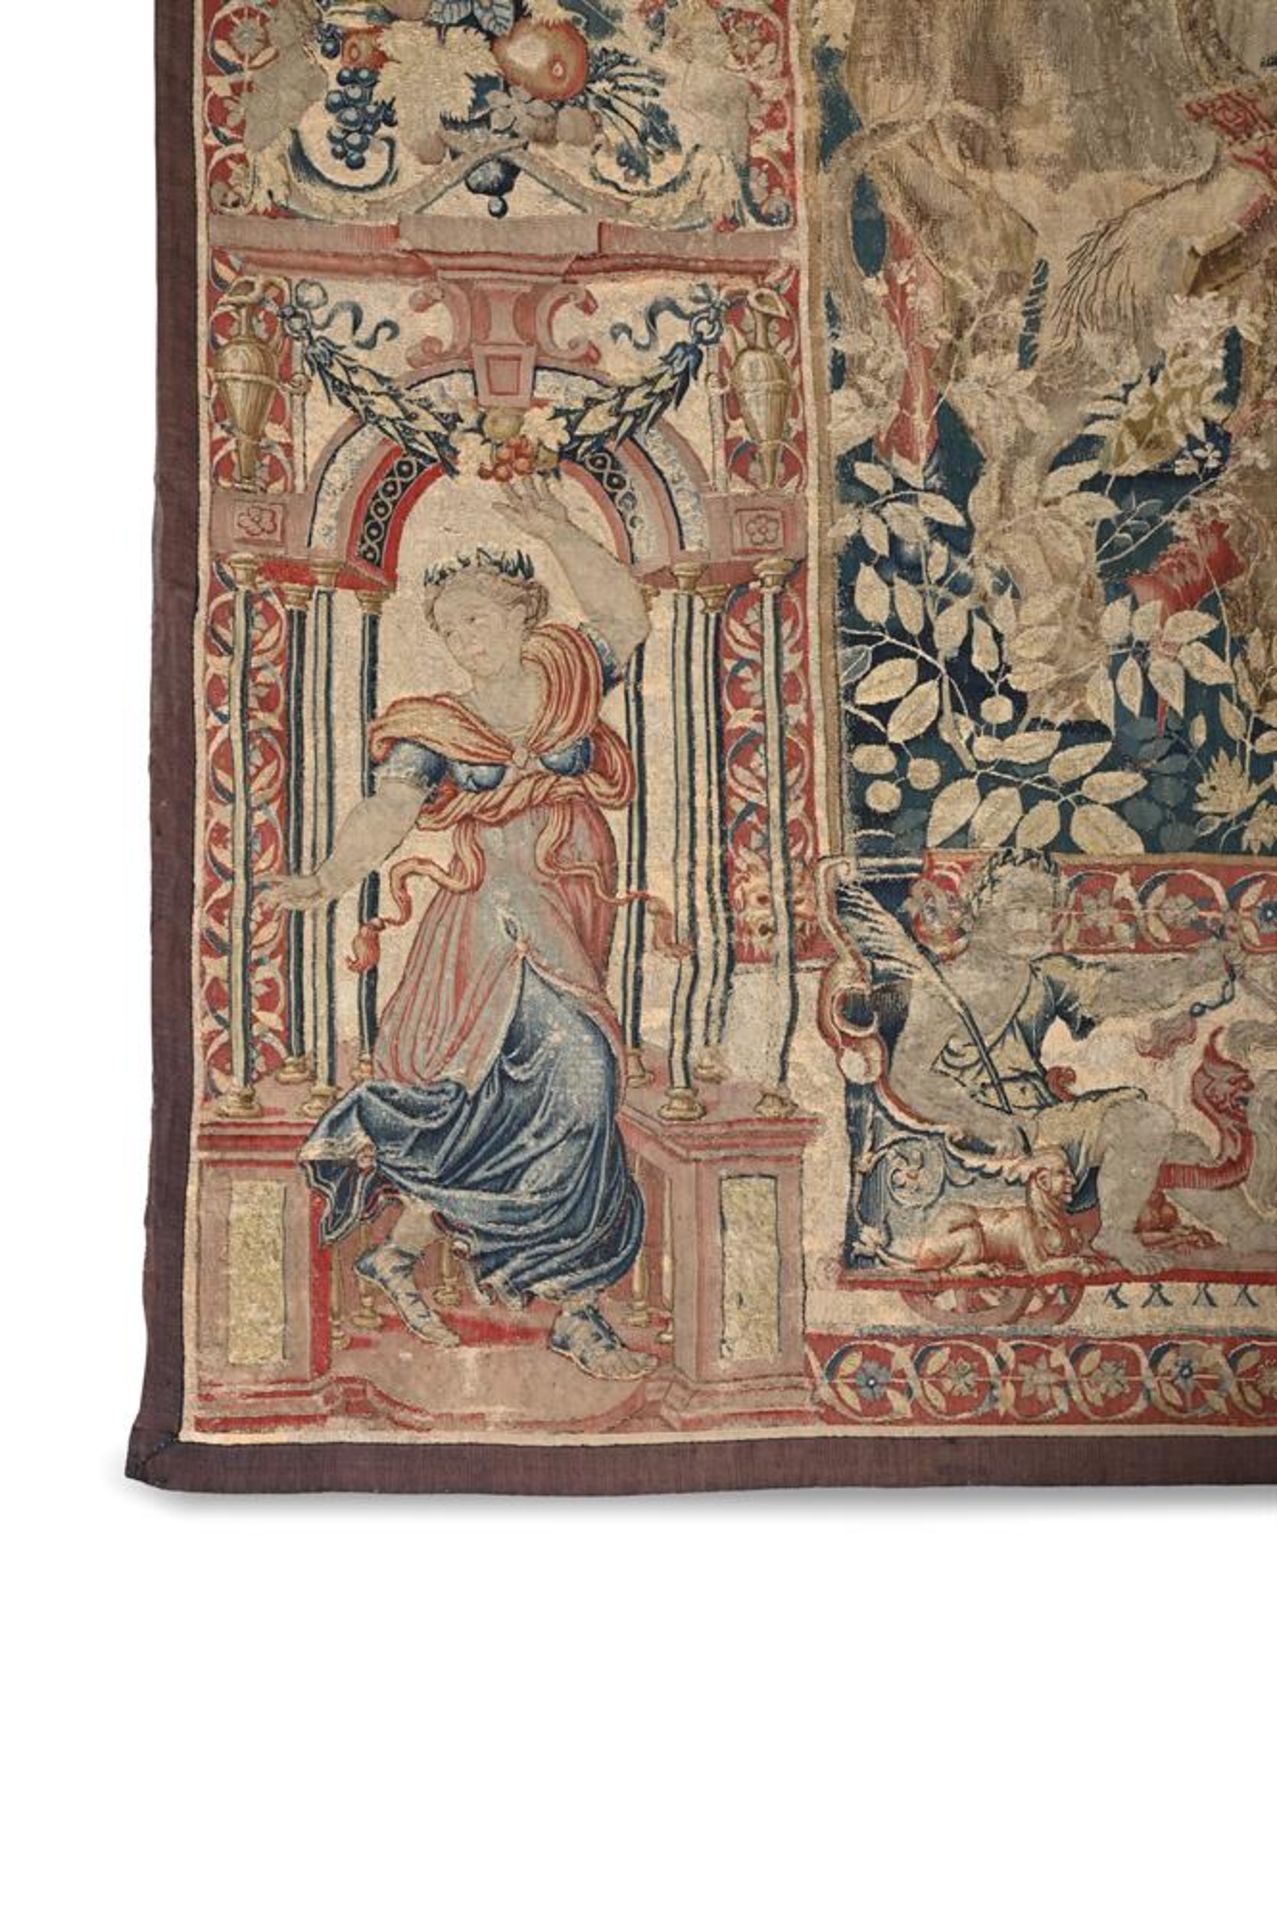 A RARE FLEMISH WOOL AND SILK HISTORICAL TAPESTRY DEPICTING A SCENE FROM THE LIFE OF HANNIBAL - Image 4 of 5